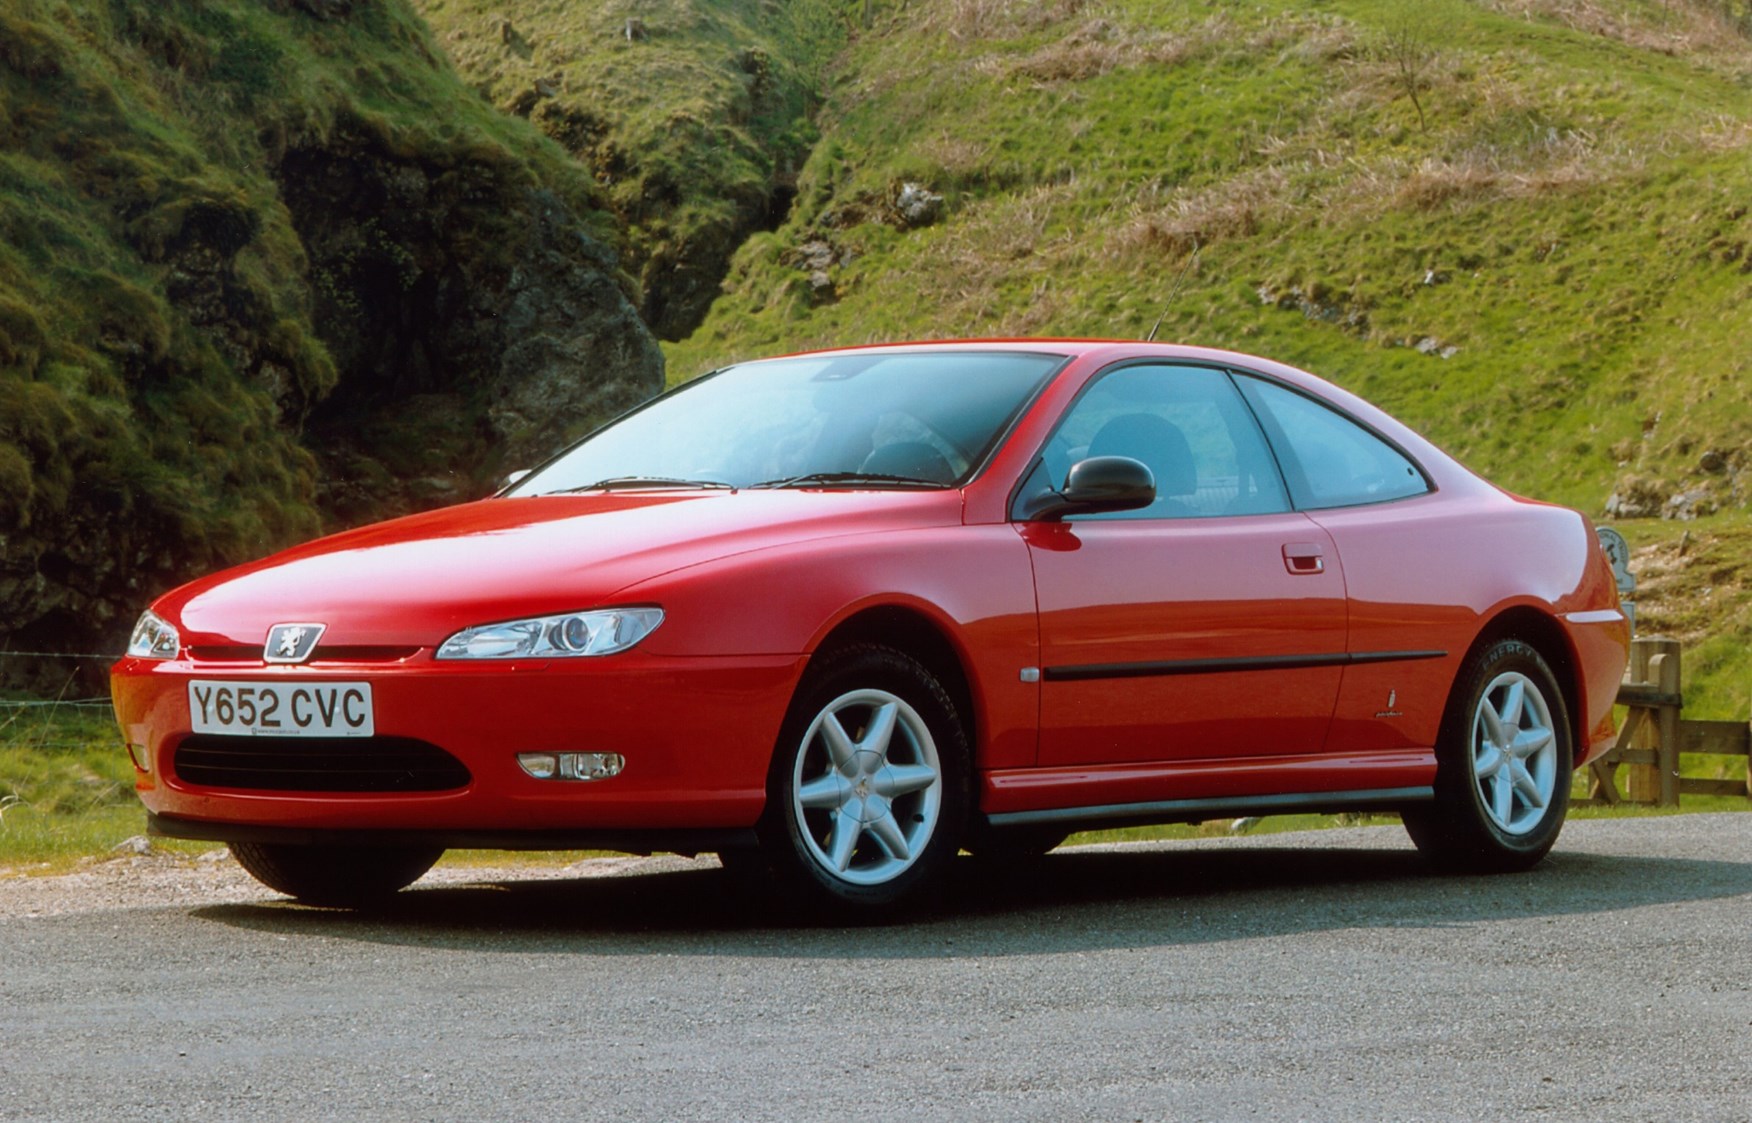 Used Peugeot 406 Coupe (1997 - 2003) Review | Parkers